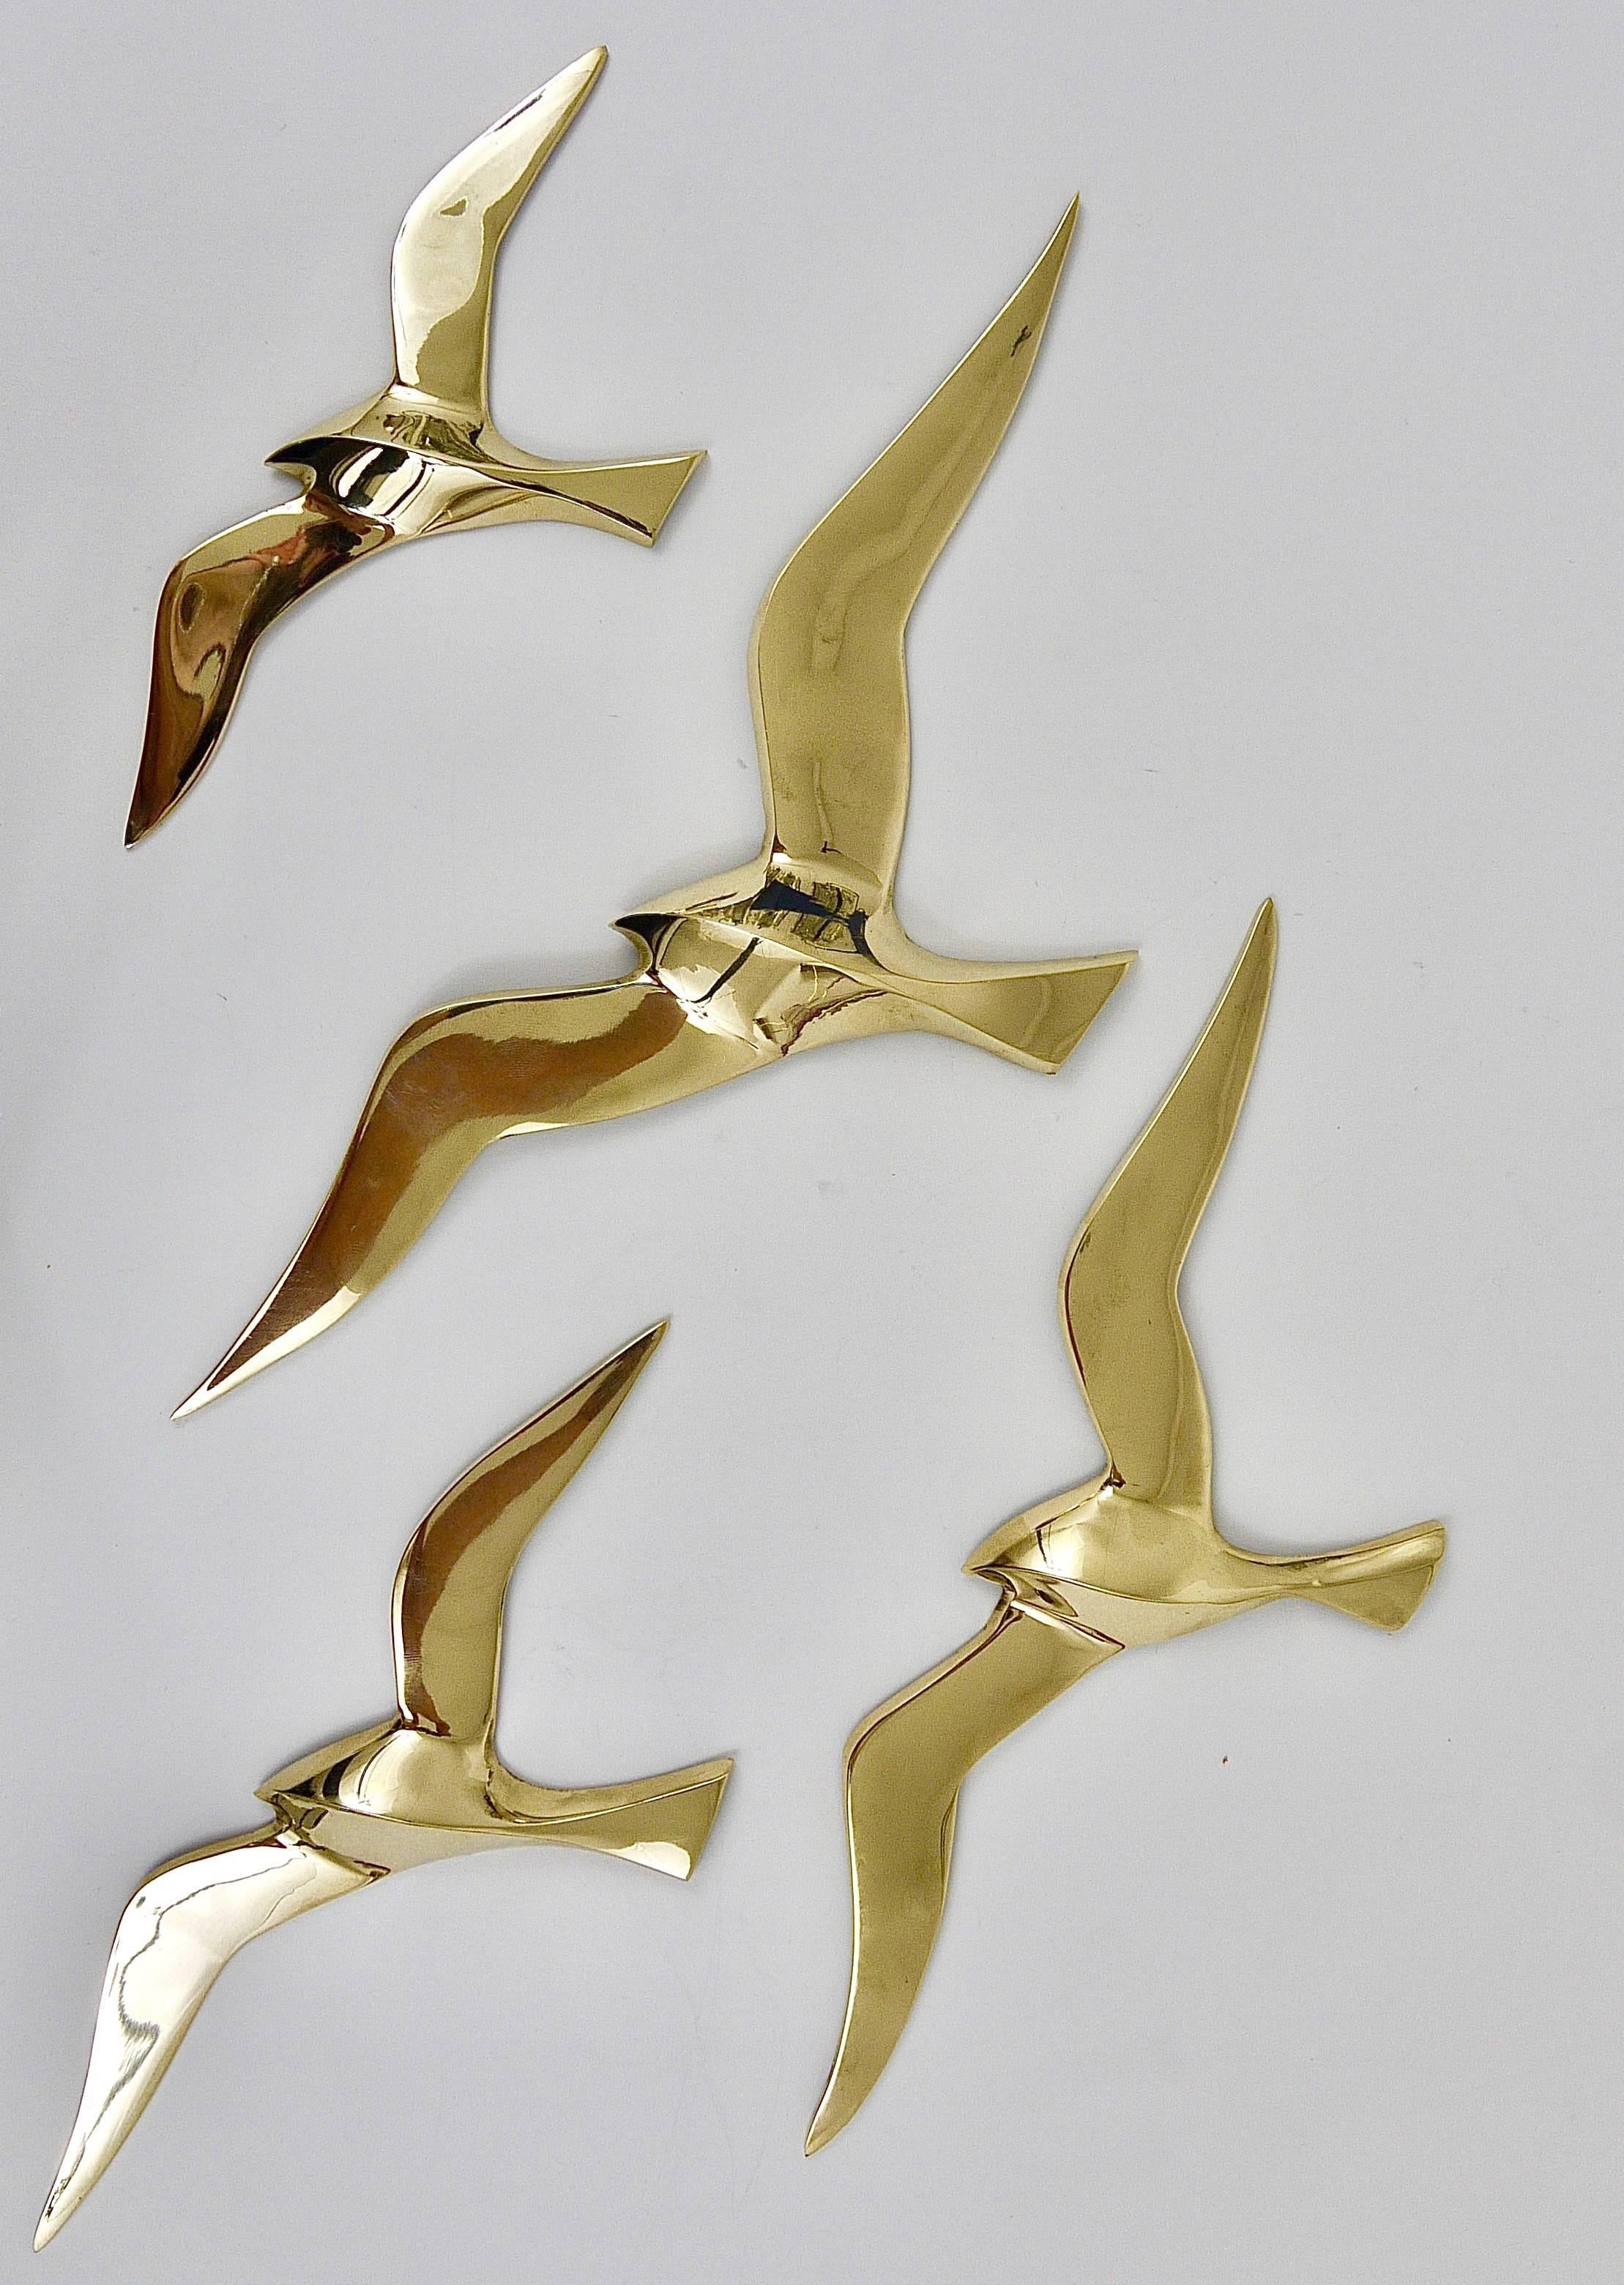 Polished Four Wall-Mounted Midcentury Seagull Bird Brass Sculptures, Austria, 1950s